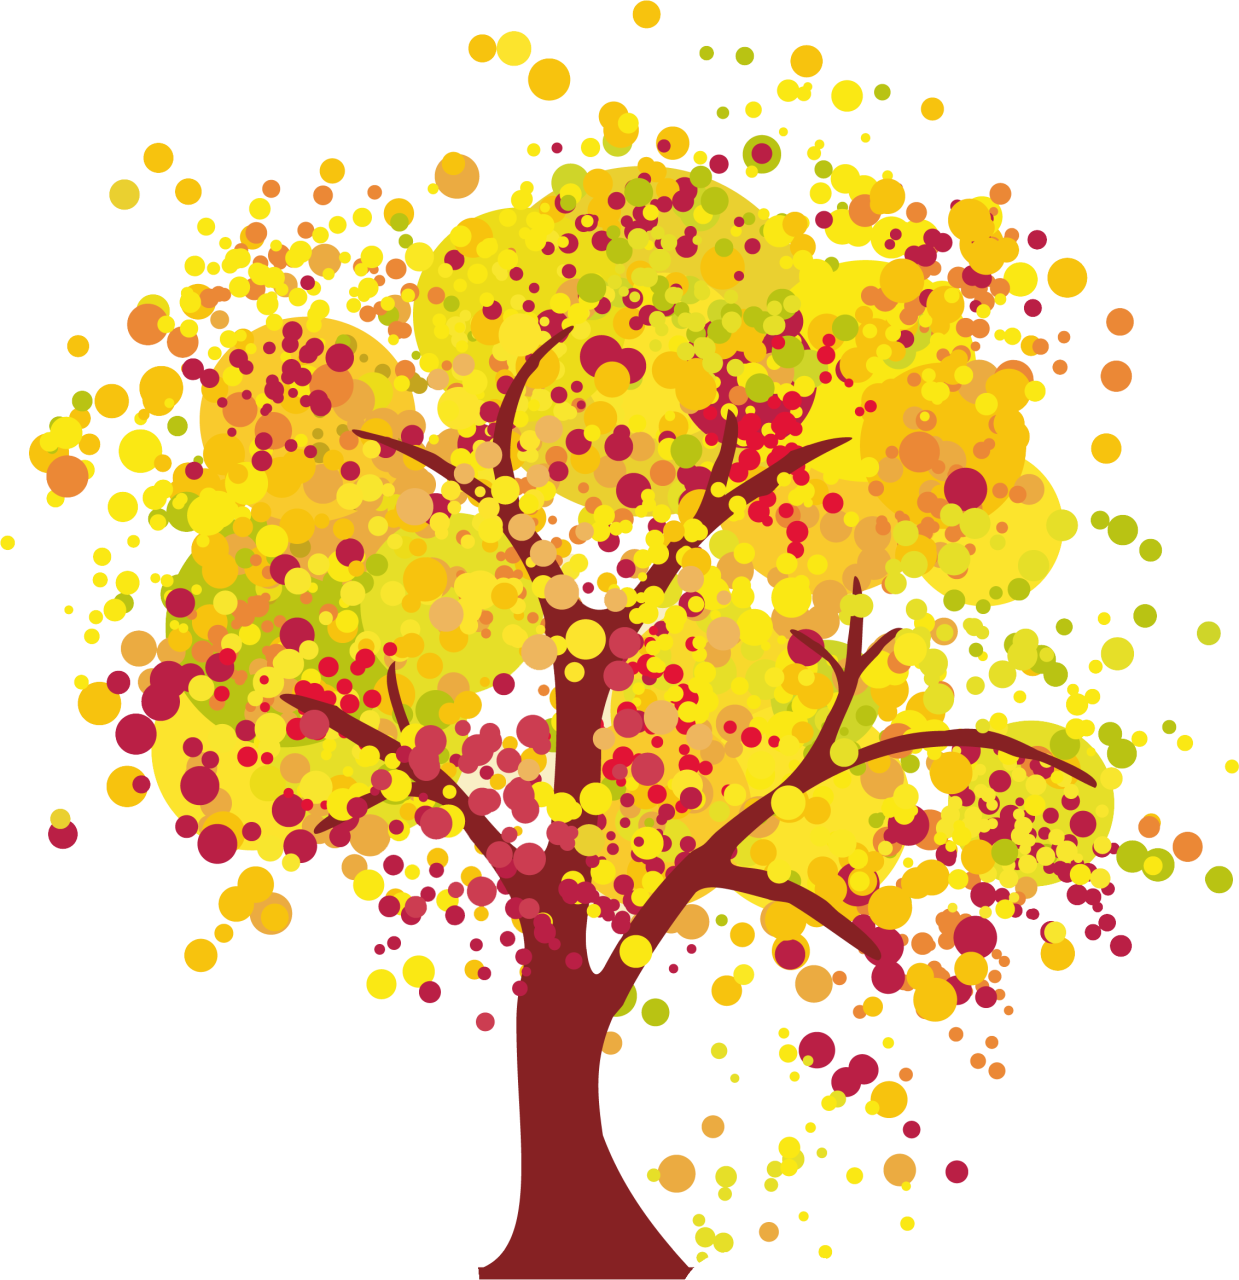 Autumn Clipart &ndash Fruitful Tree Clipart - Guidance To Sense Of Well-being (1239x1280)